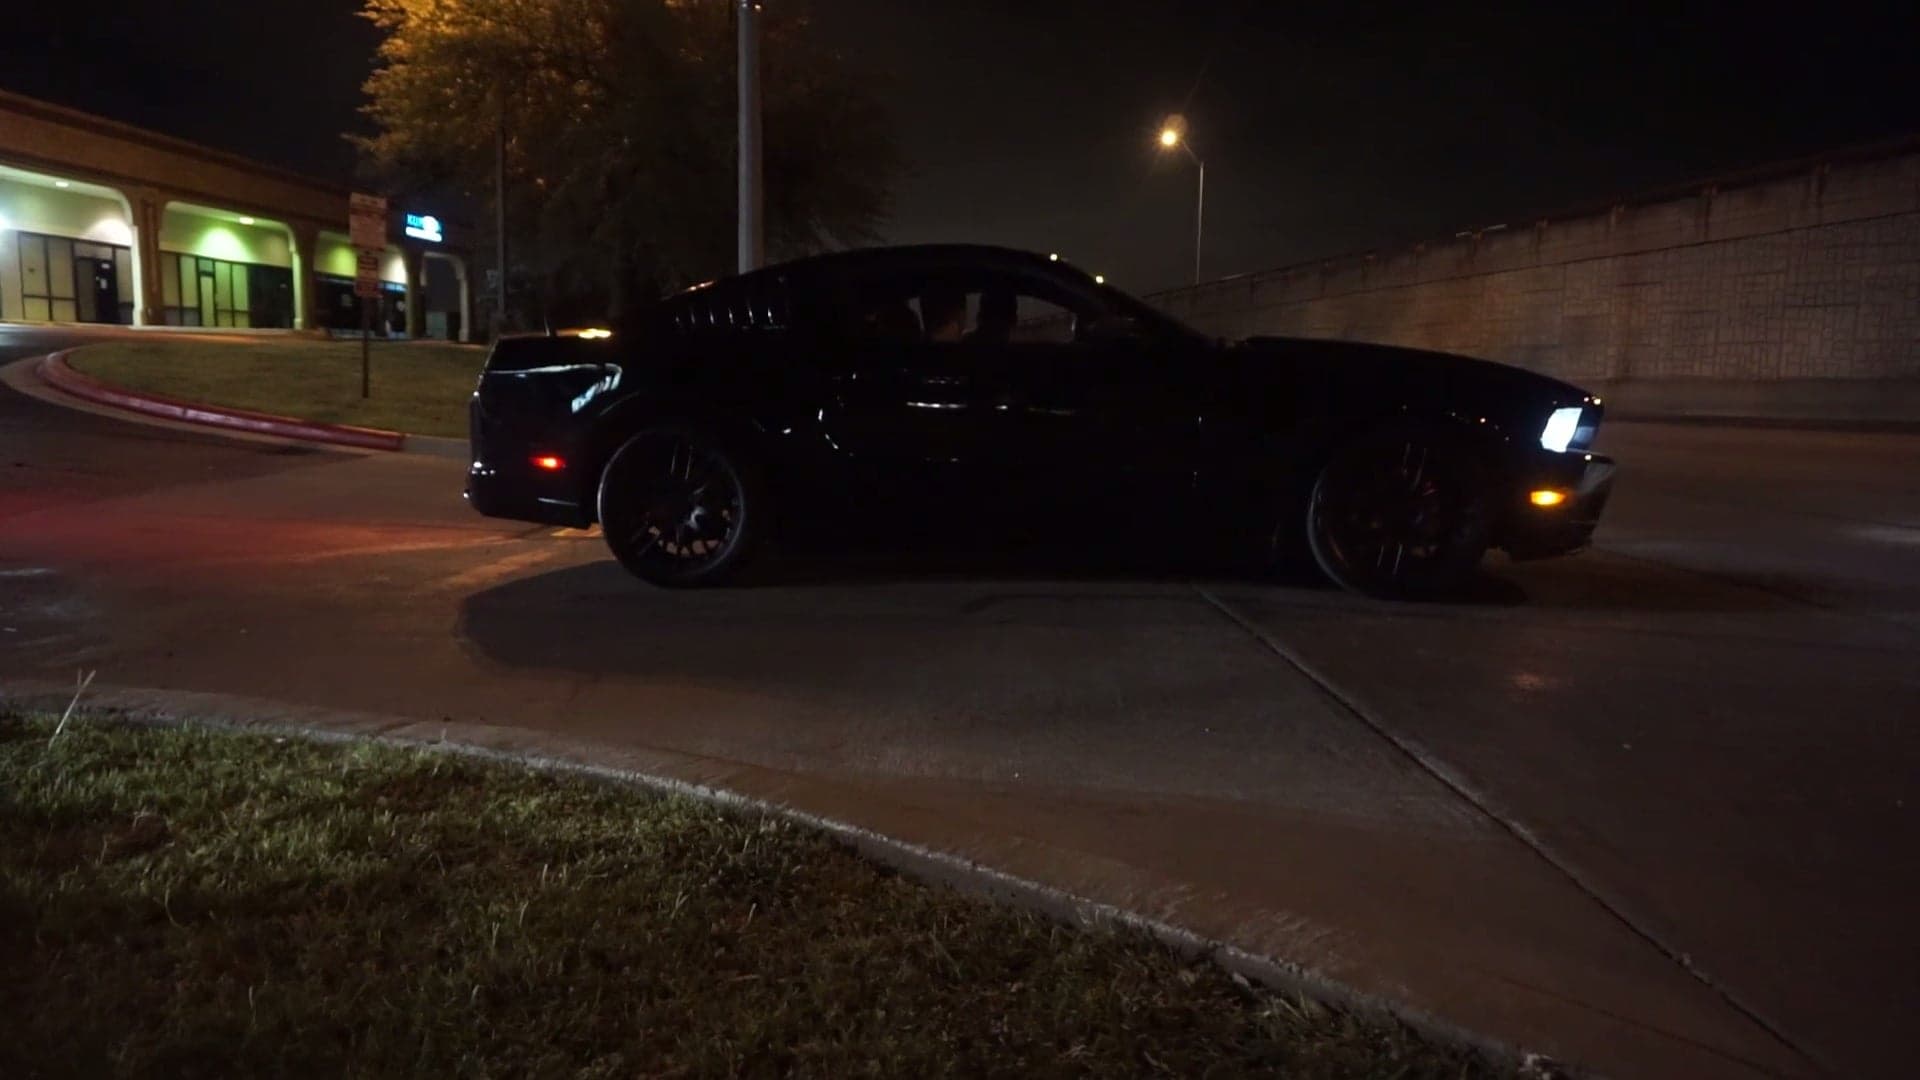 Watch Another Ford Mustang Lose it While Leaving a Show